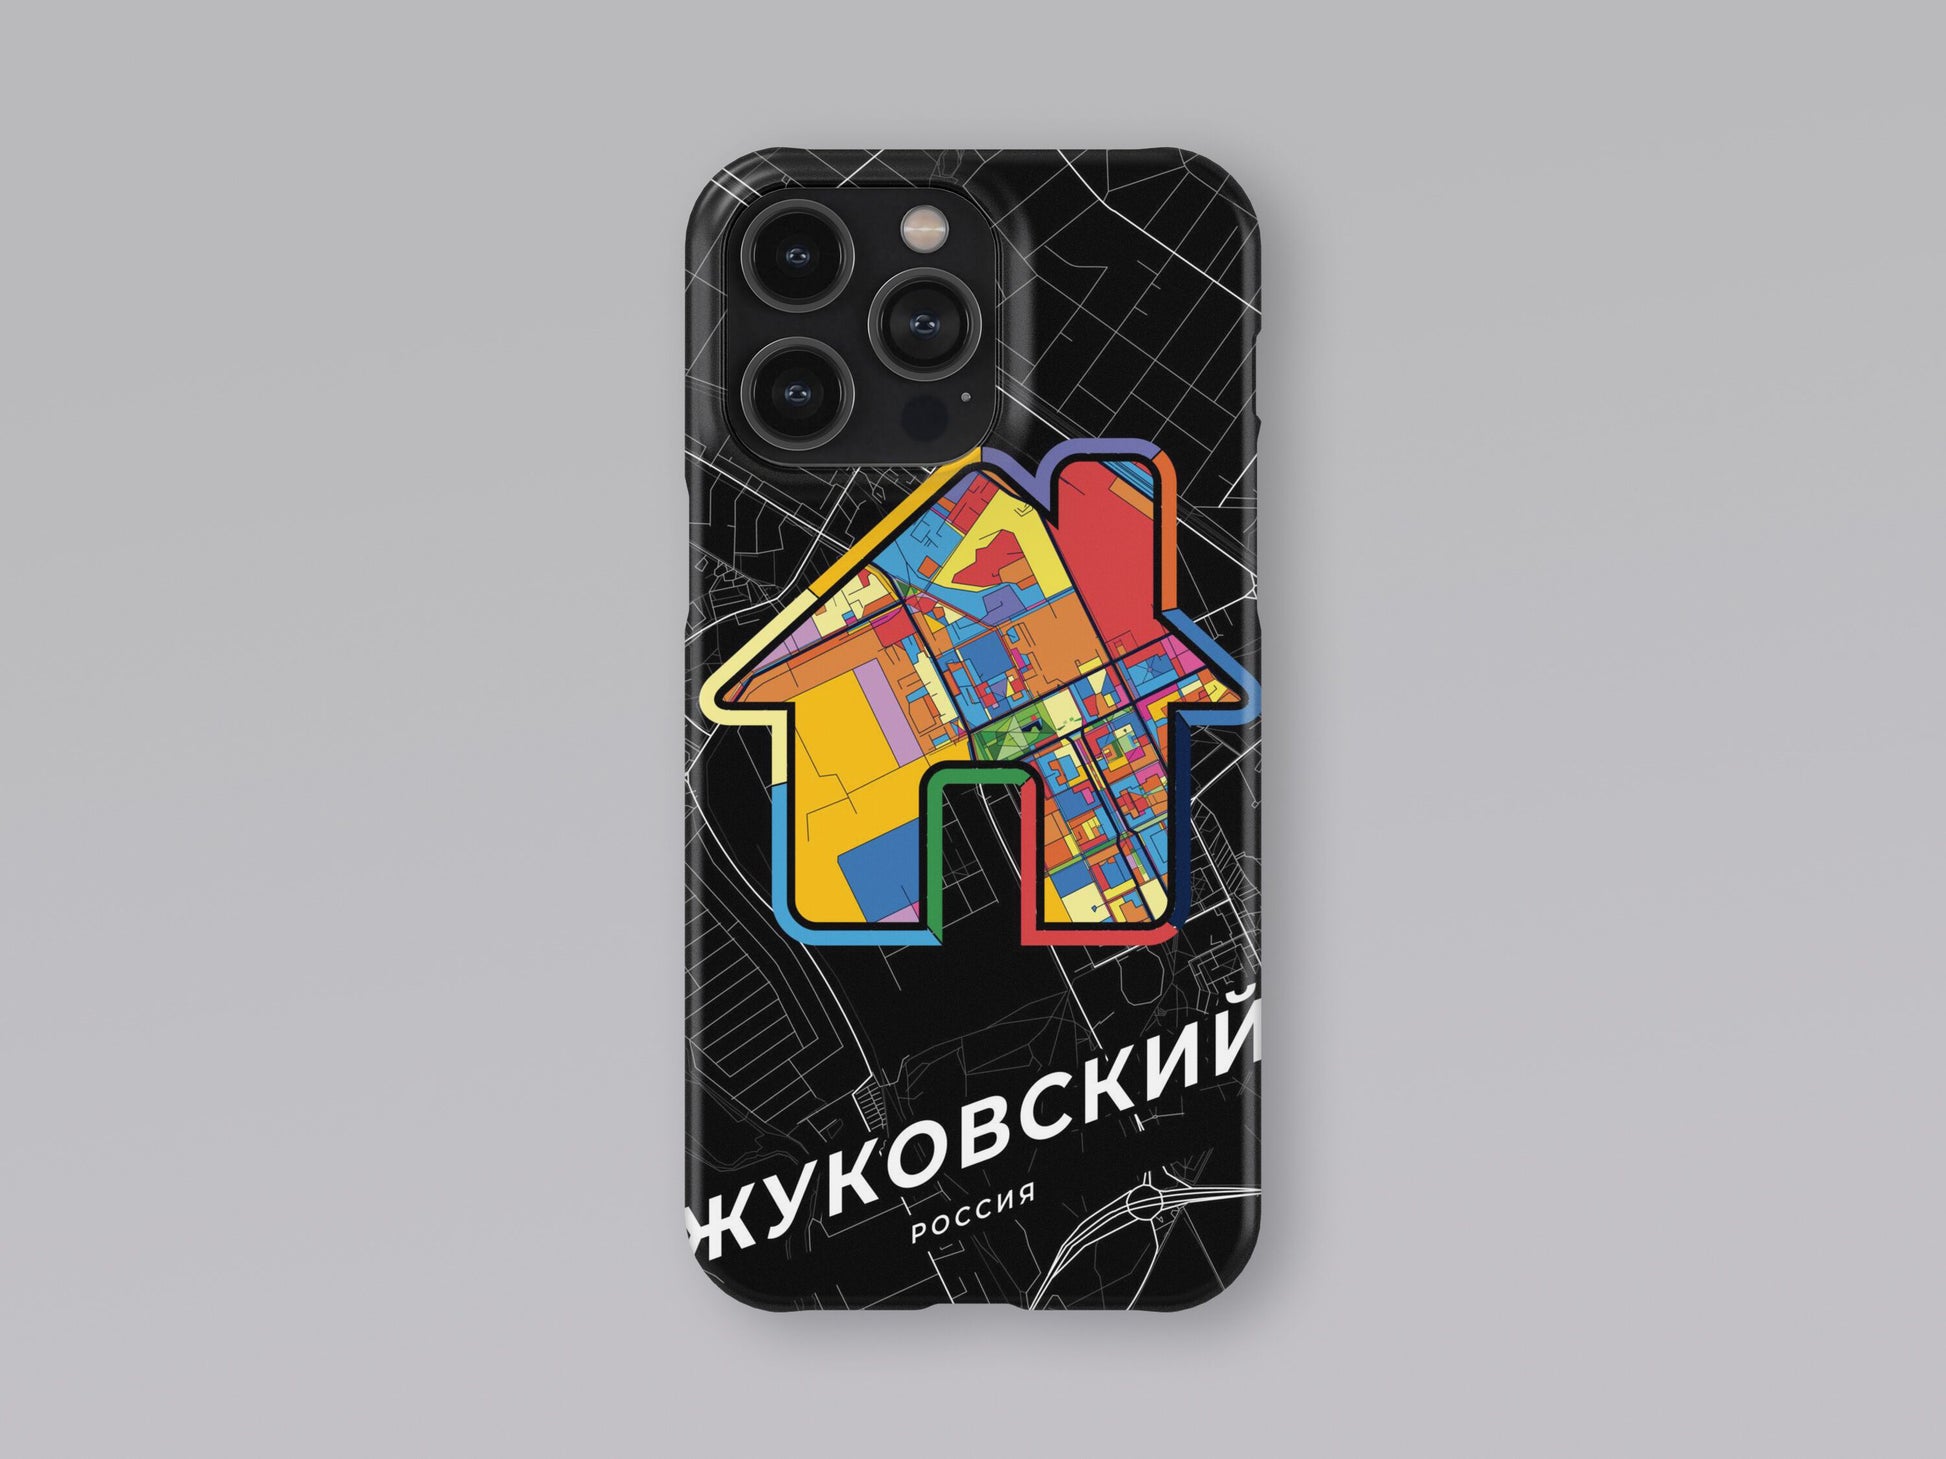 Zhukovsky Russia slim phone case with colorful icon 3